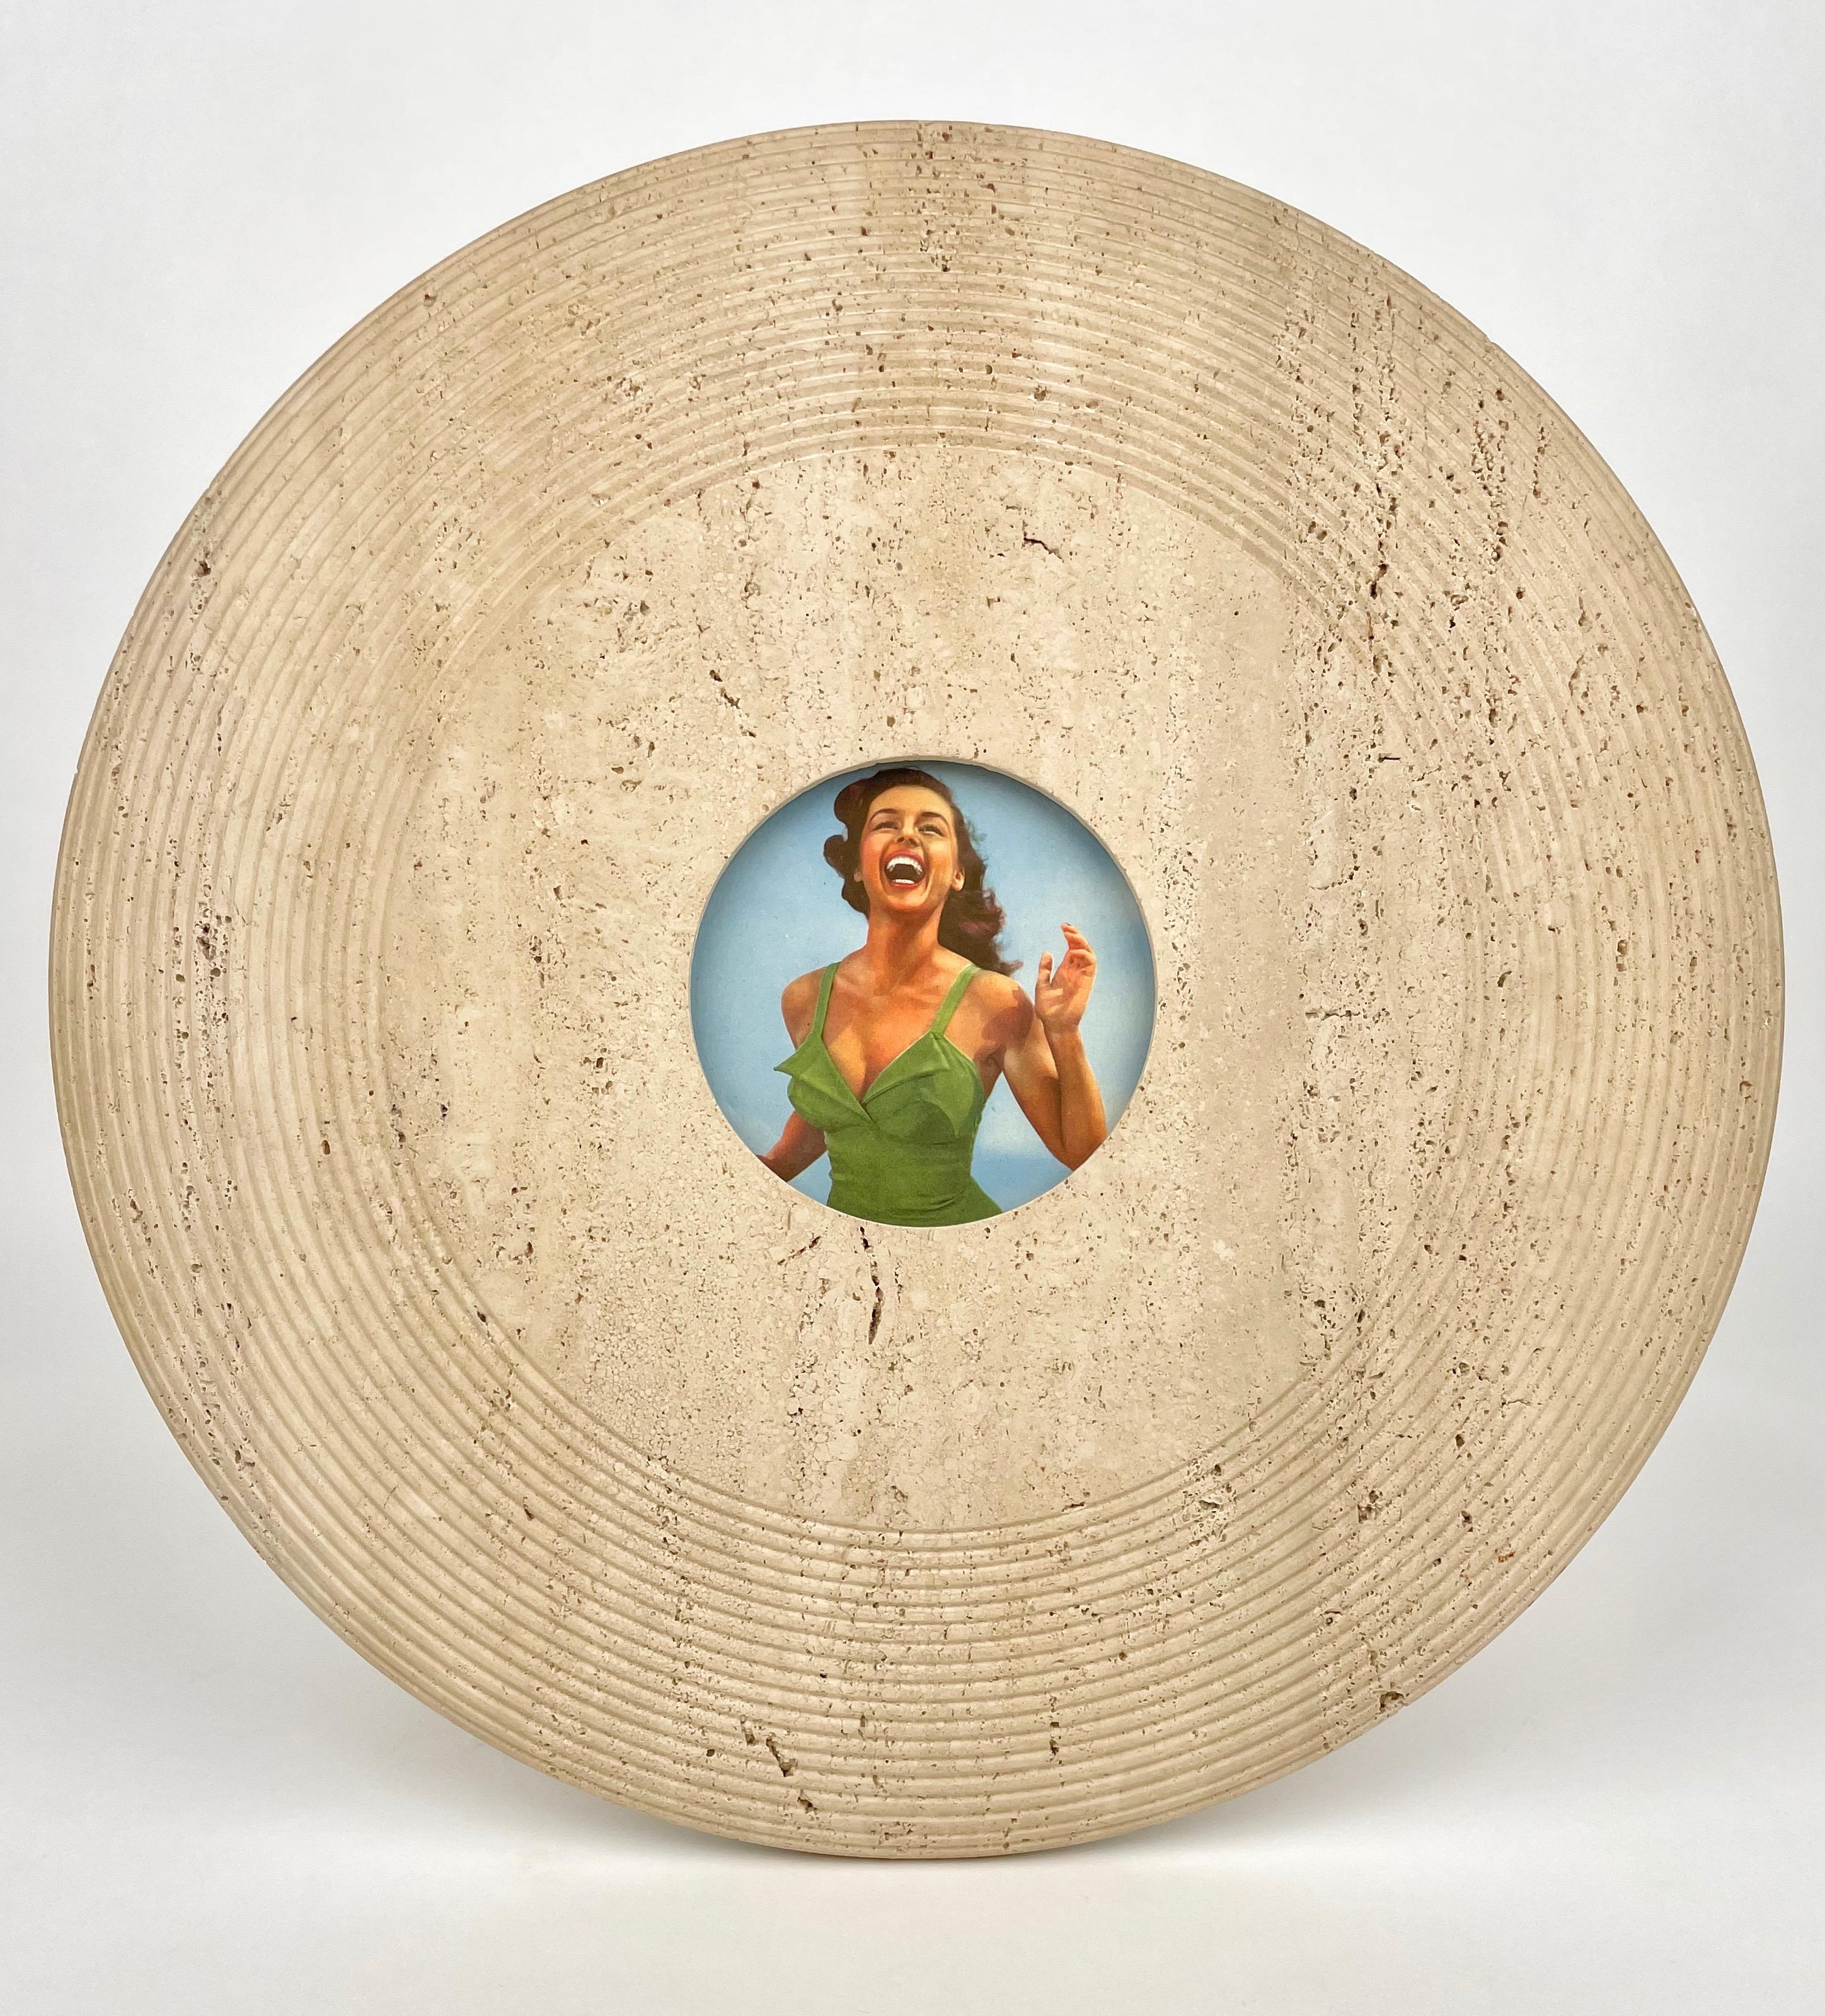 Big picture frame in travertine , glass and wood attributed to Egidio Di Rosa & Pier Alessandro Giusti.

Made in Italy 1970s.

Picture diameter 10.5 cm.